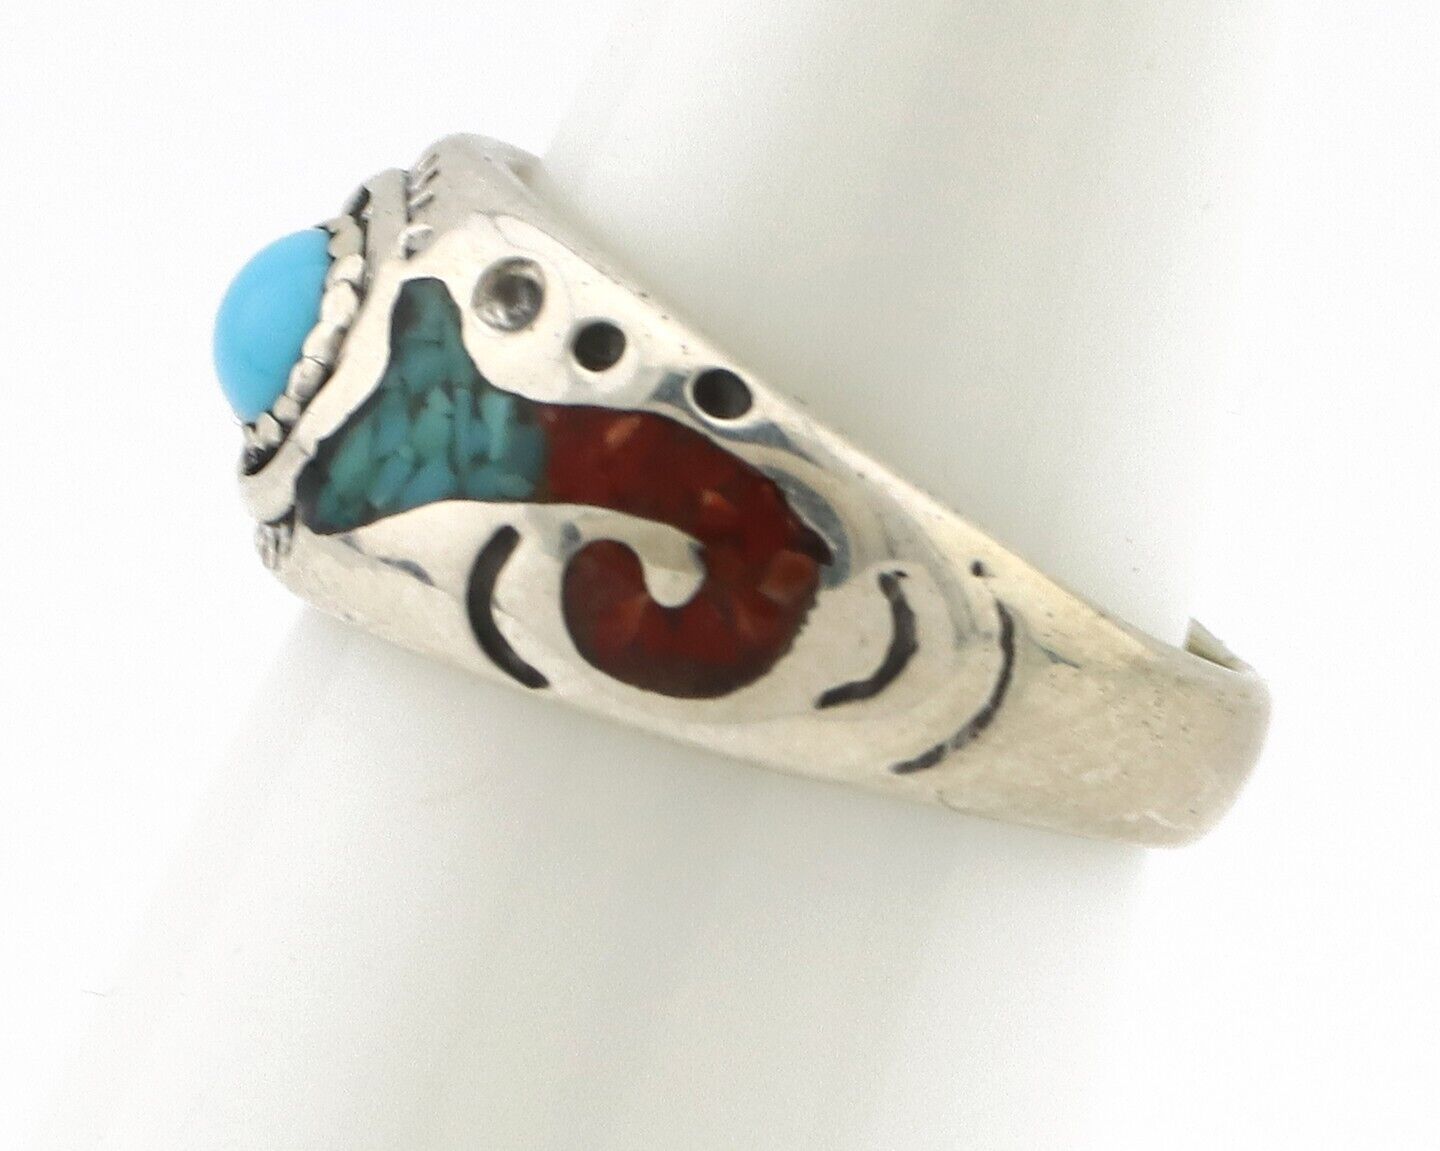 Navajo Handmade Ring 925 Silver Blue Turquoise & Coral Native American Artist